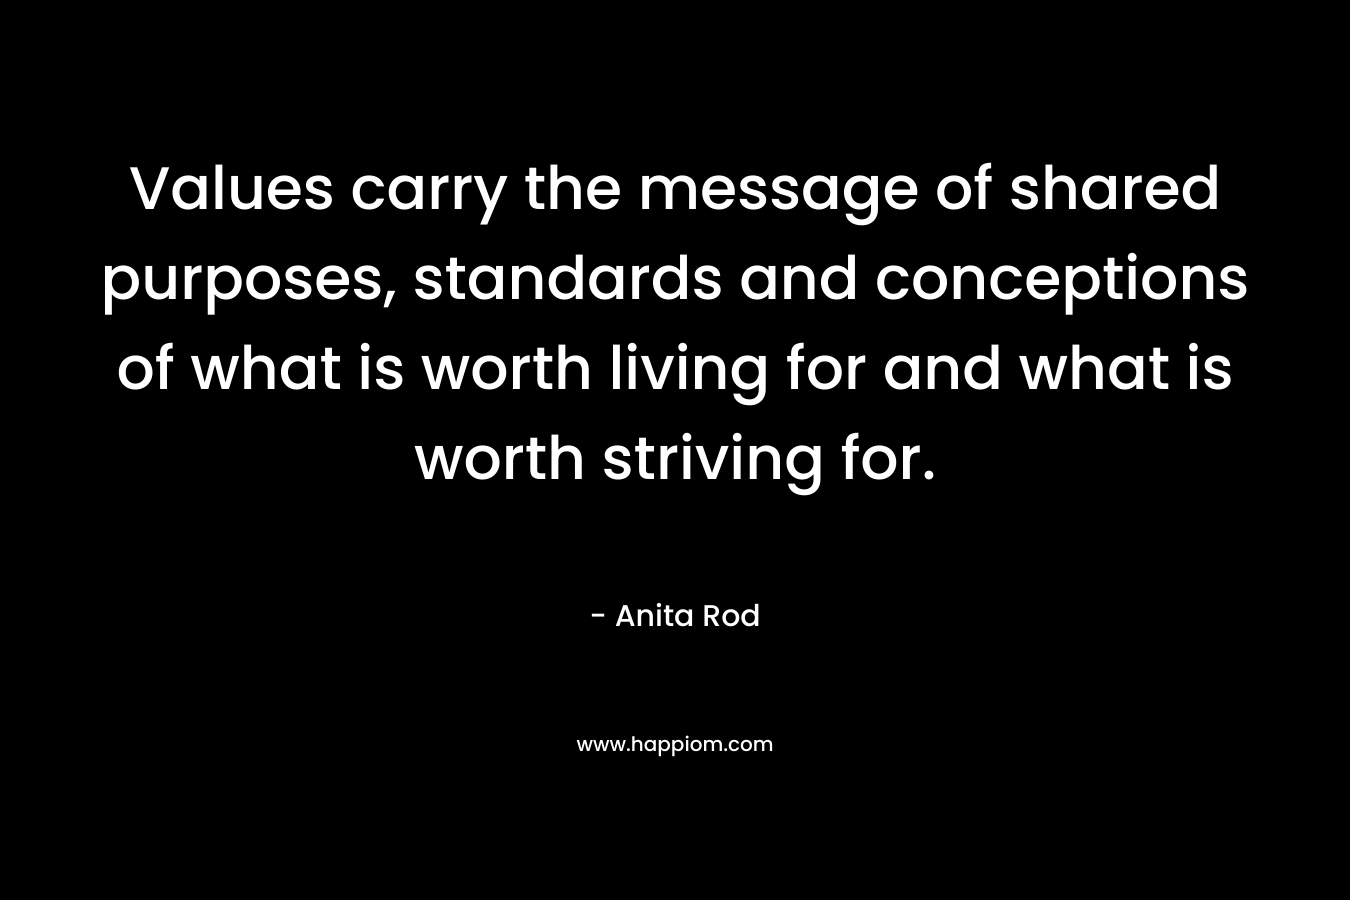 Values carry the message of shared purposes, standards and conceptions of what is worth living for and what is worth striving for. – Anita Rod